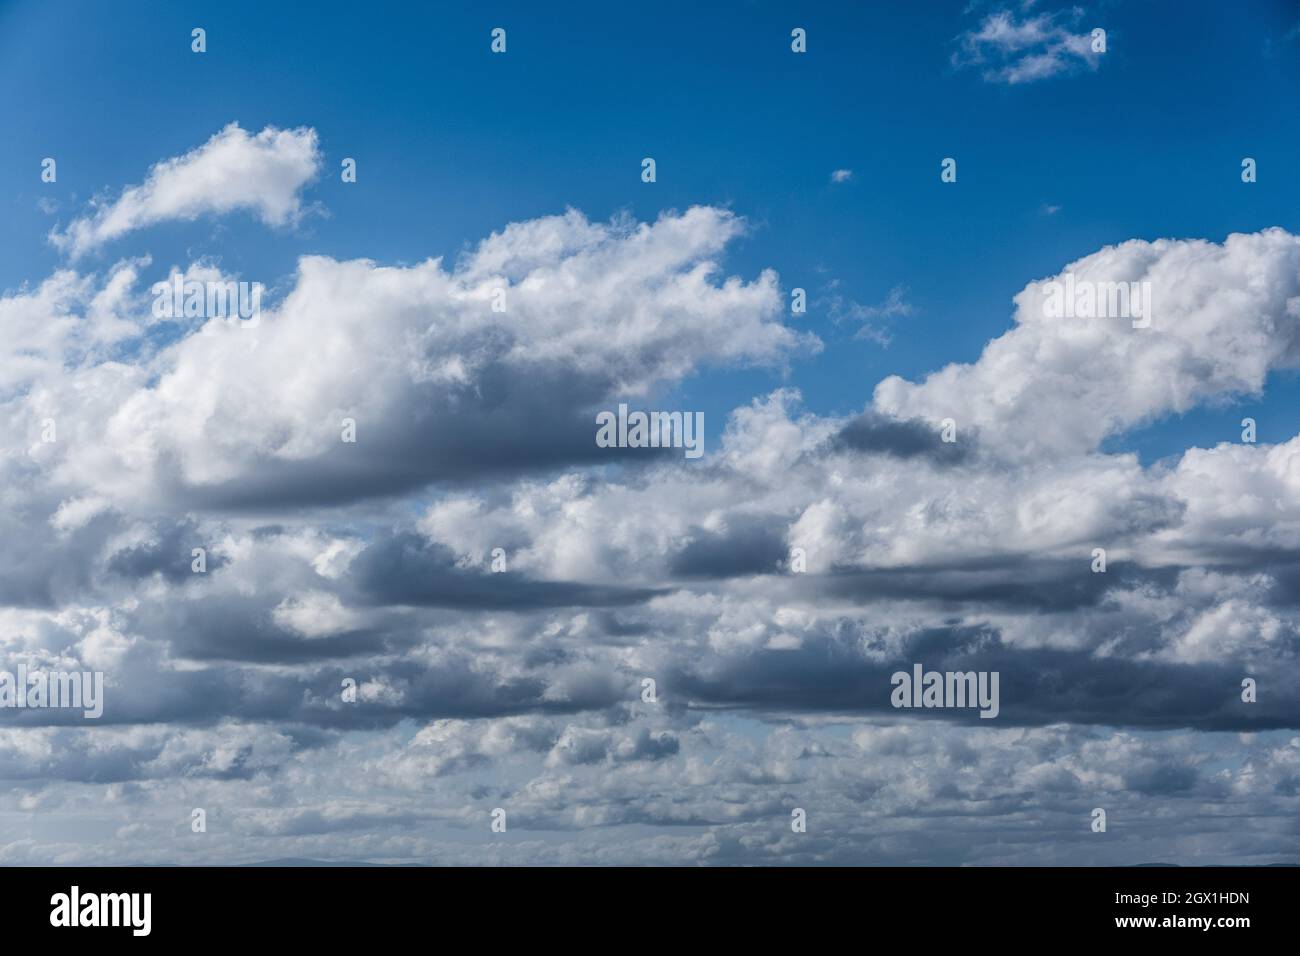 Low Angle View Of Clouds In Sky Stock Photo